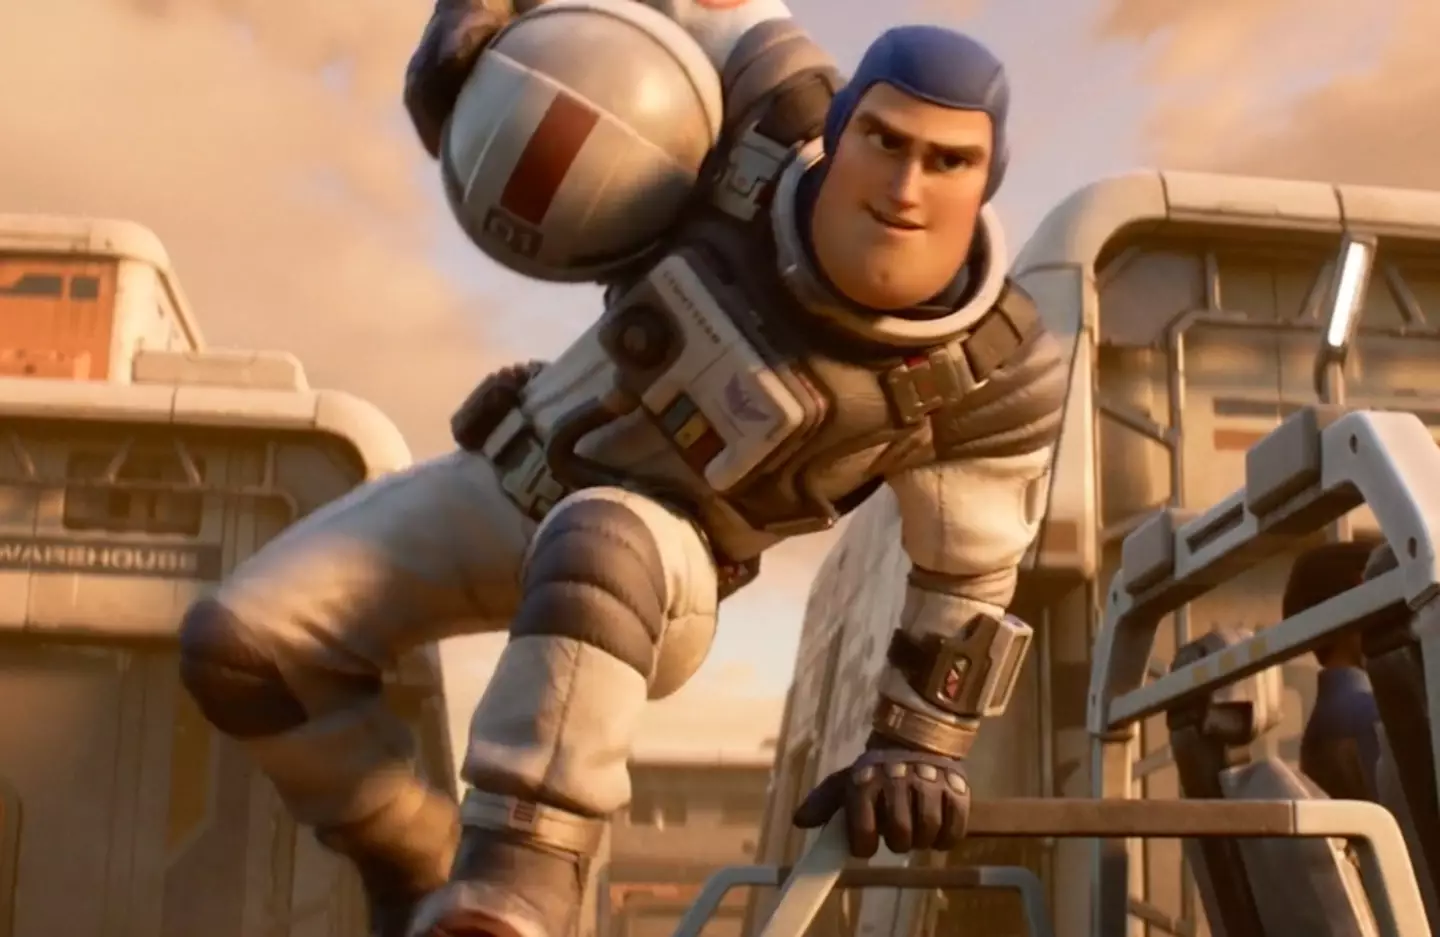 Chris Evans voices the iconic Toy Story character in the movie.